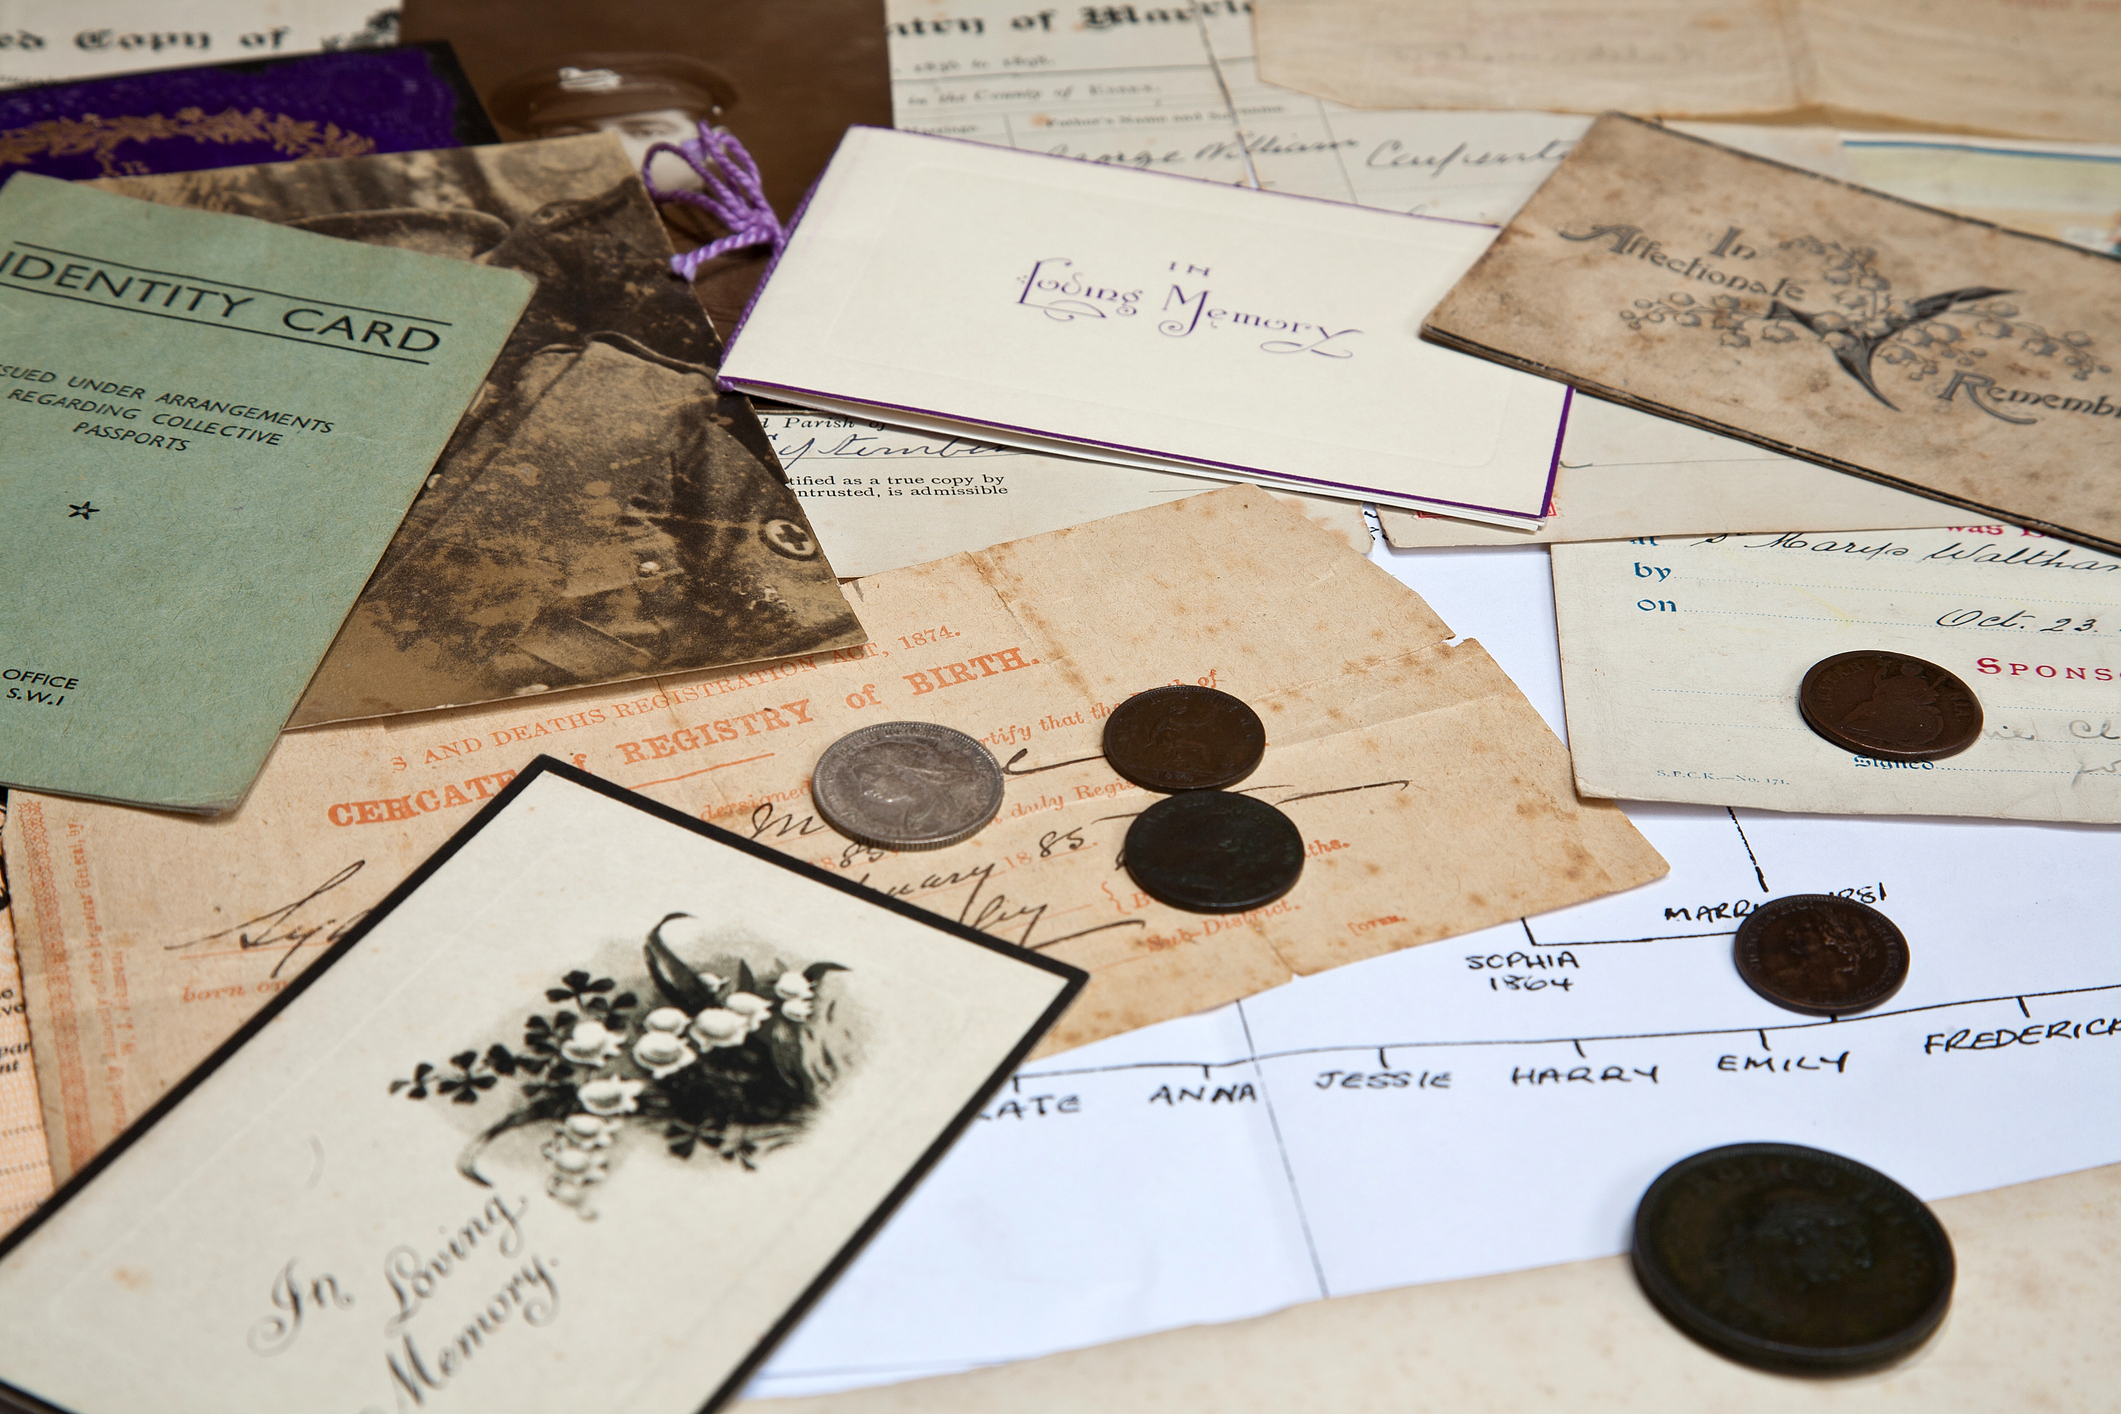 personal family history documents and photographs for genealogy research